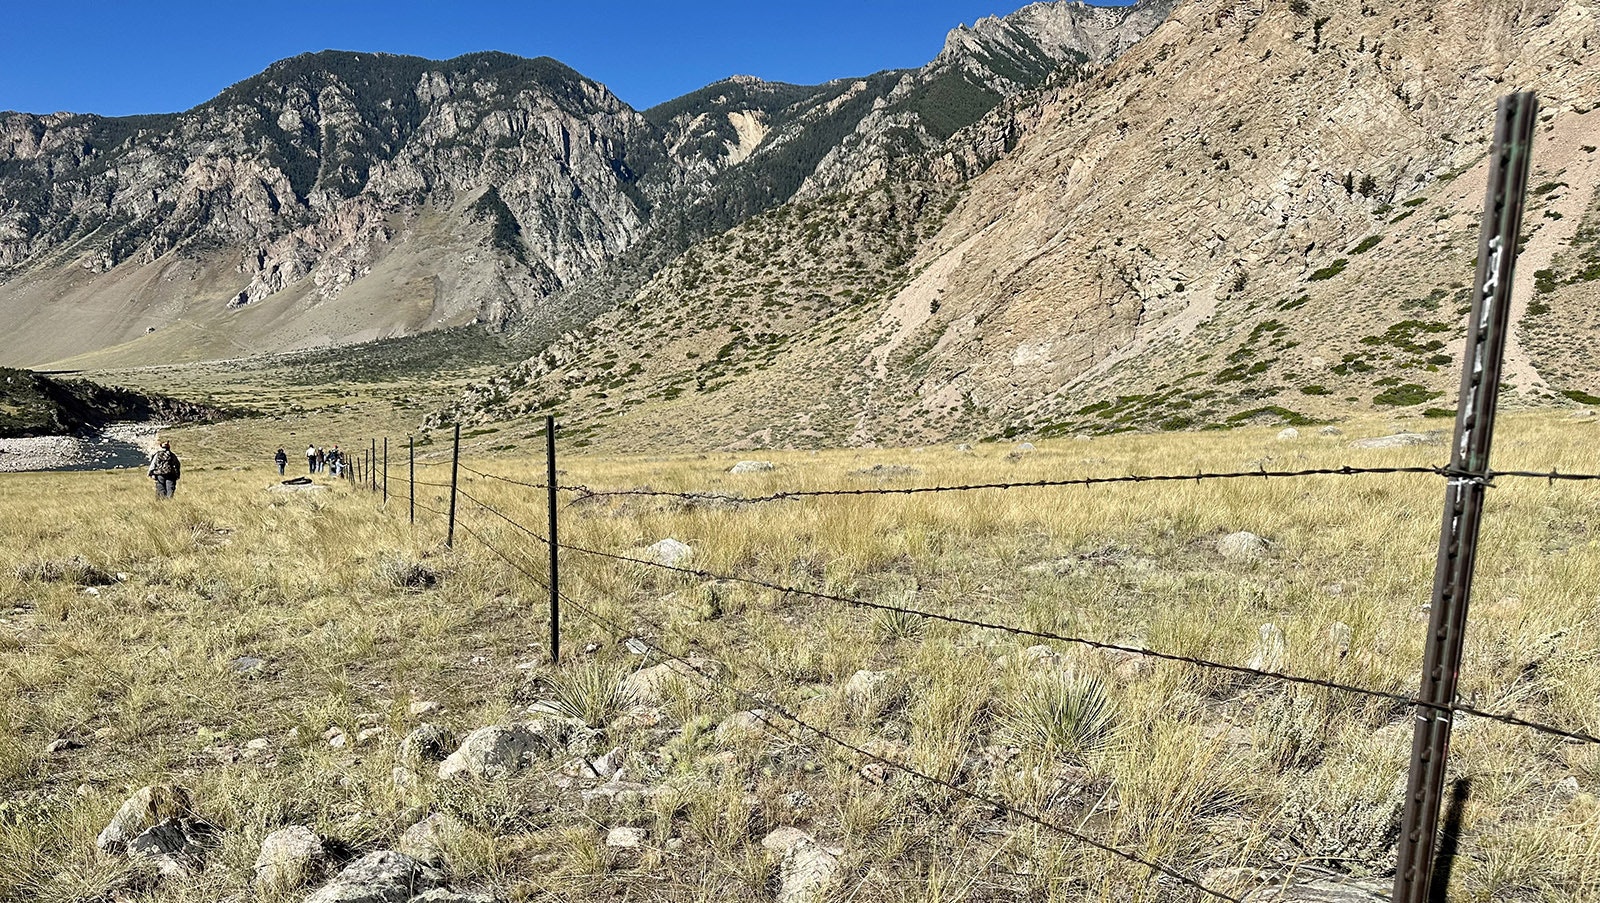 The modified right-of-way fencing near the Clarks Fork Canyon parking area. The modified fence has a lower top wire and a higher low wire so animals can more freely go over or under the fence during their natural migrations.